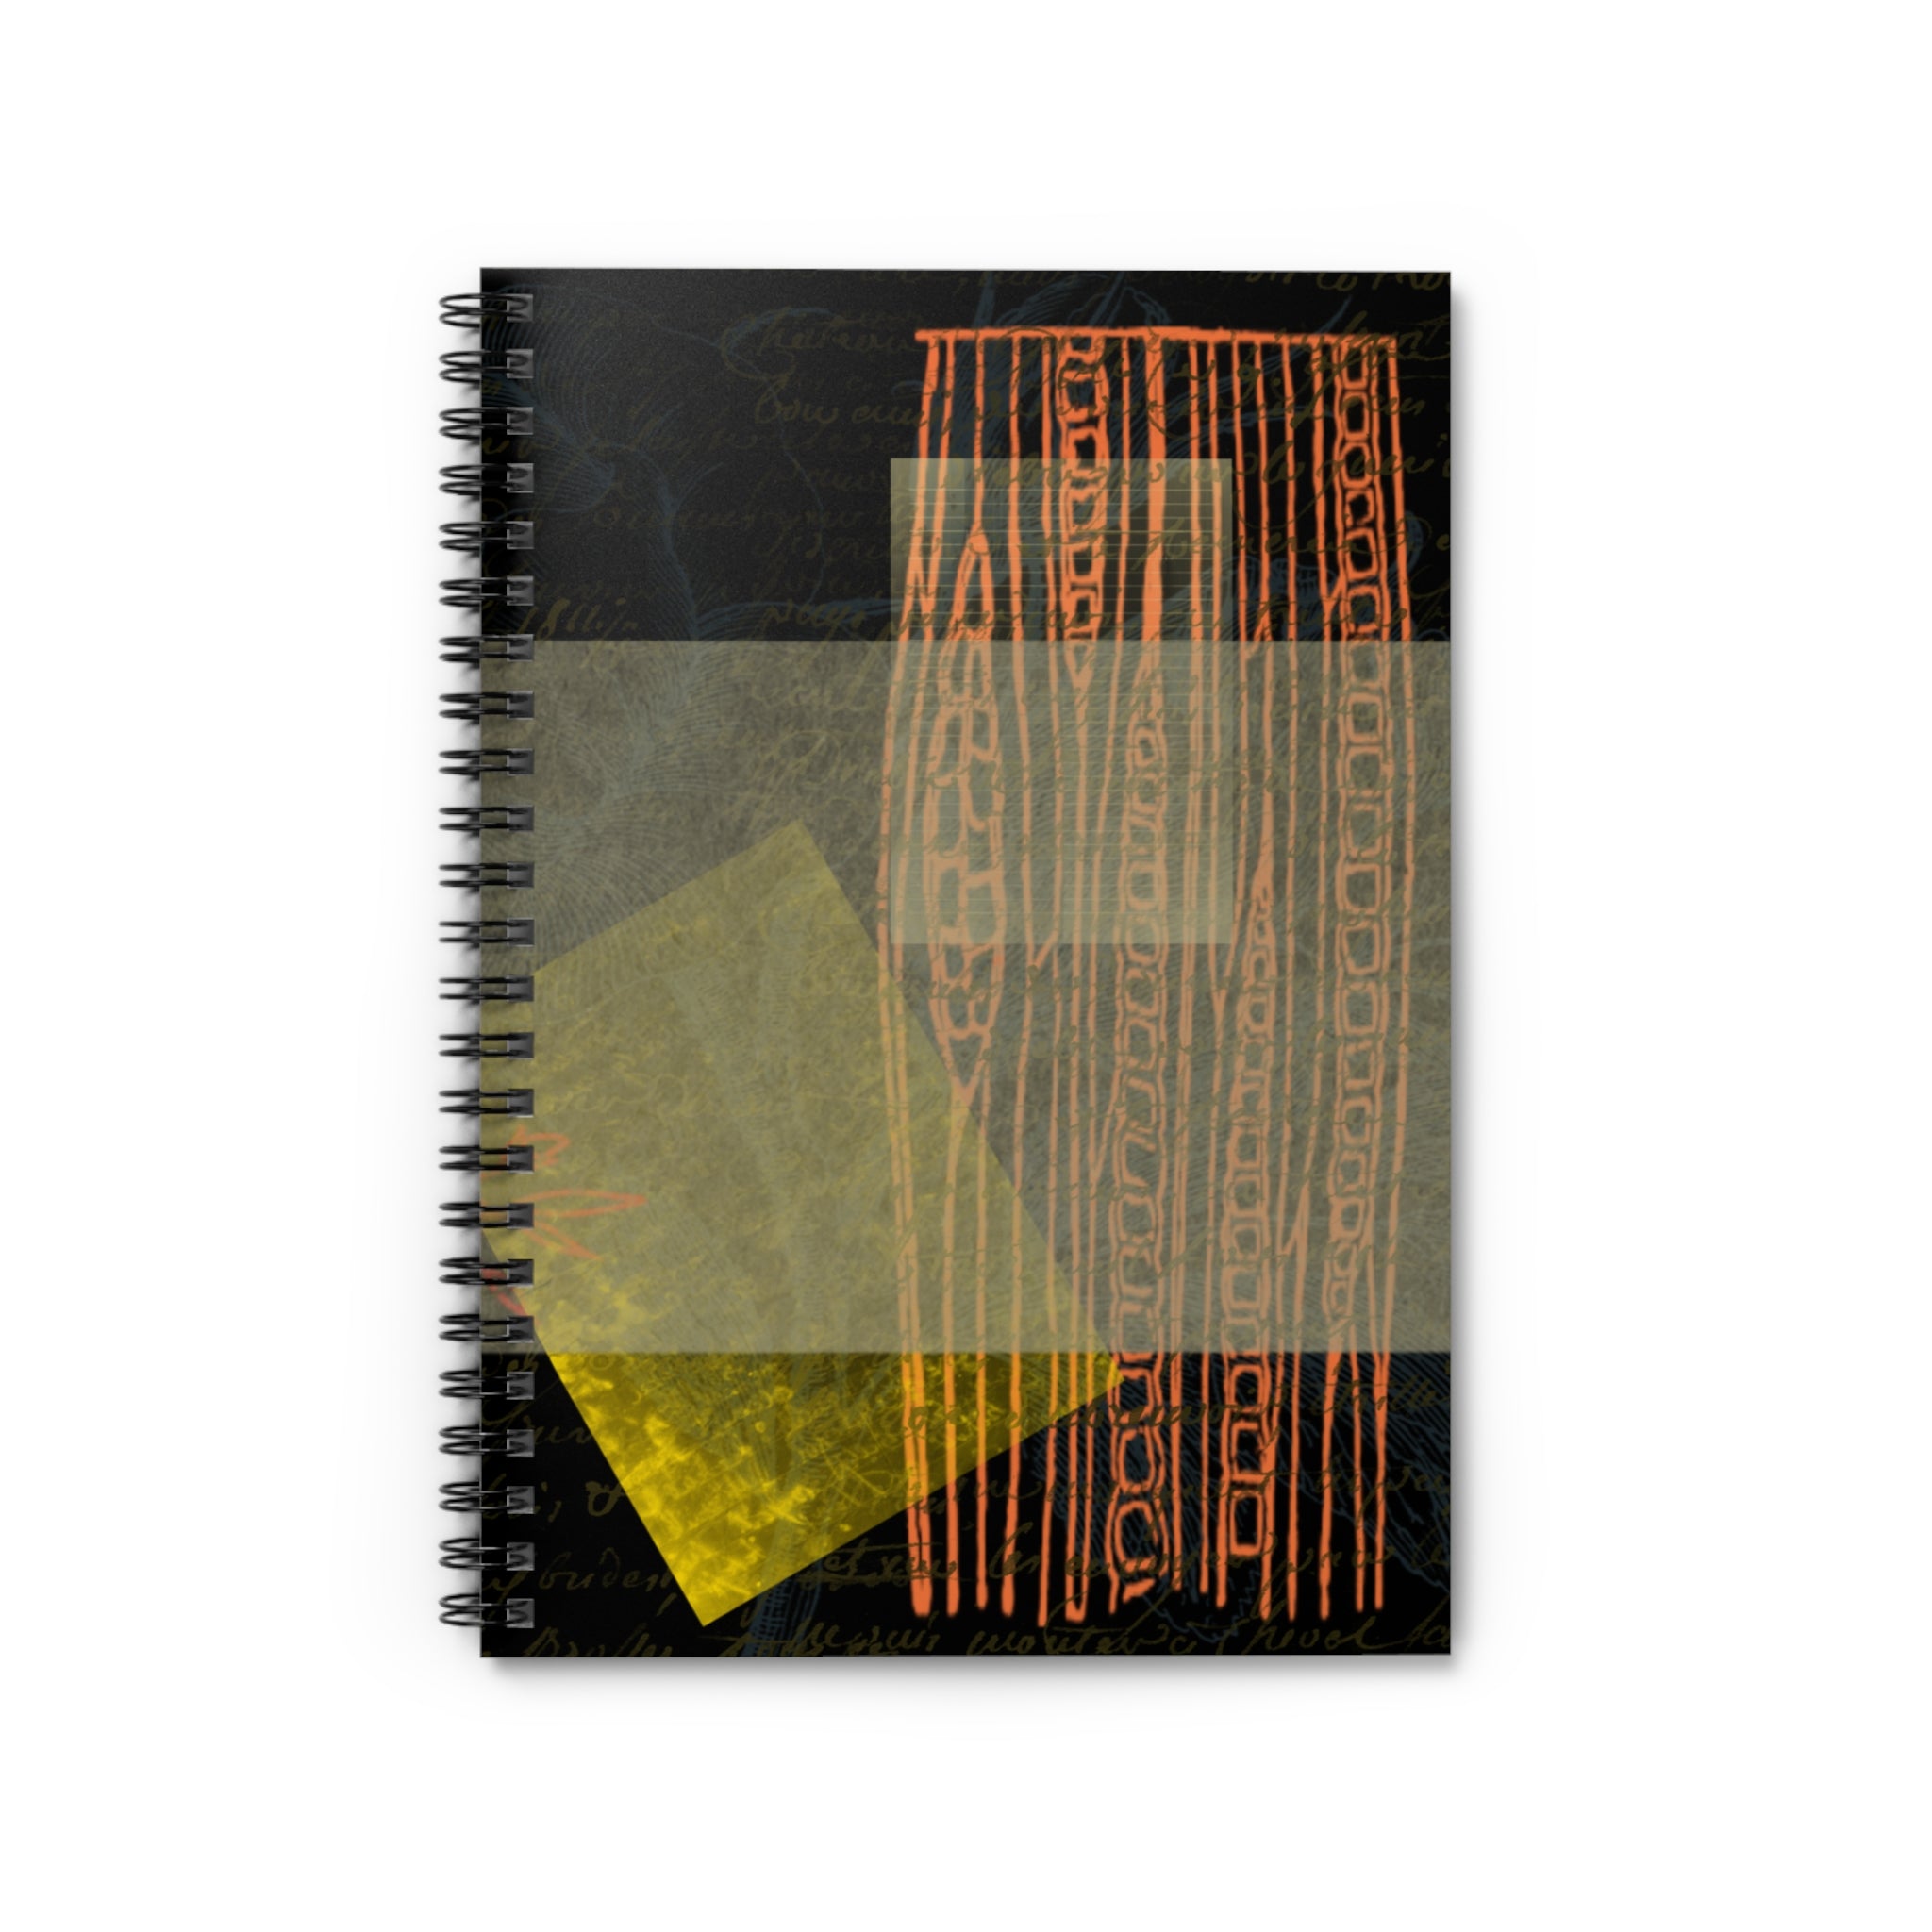 ANCIENT PATTERNS Spiral Notebook - Ruled Line